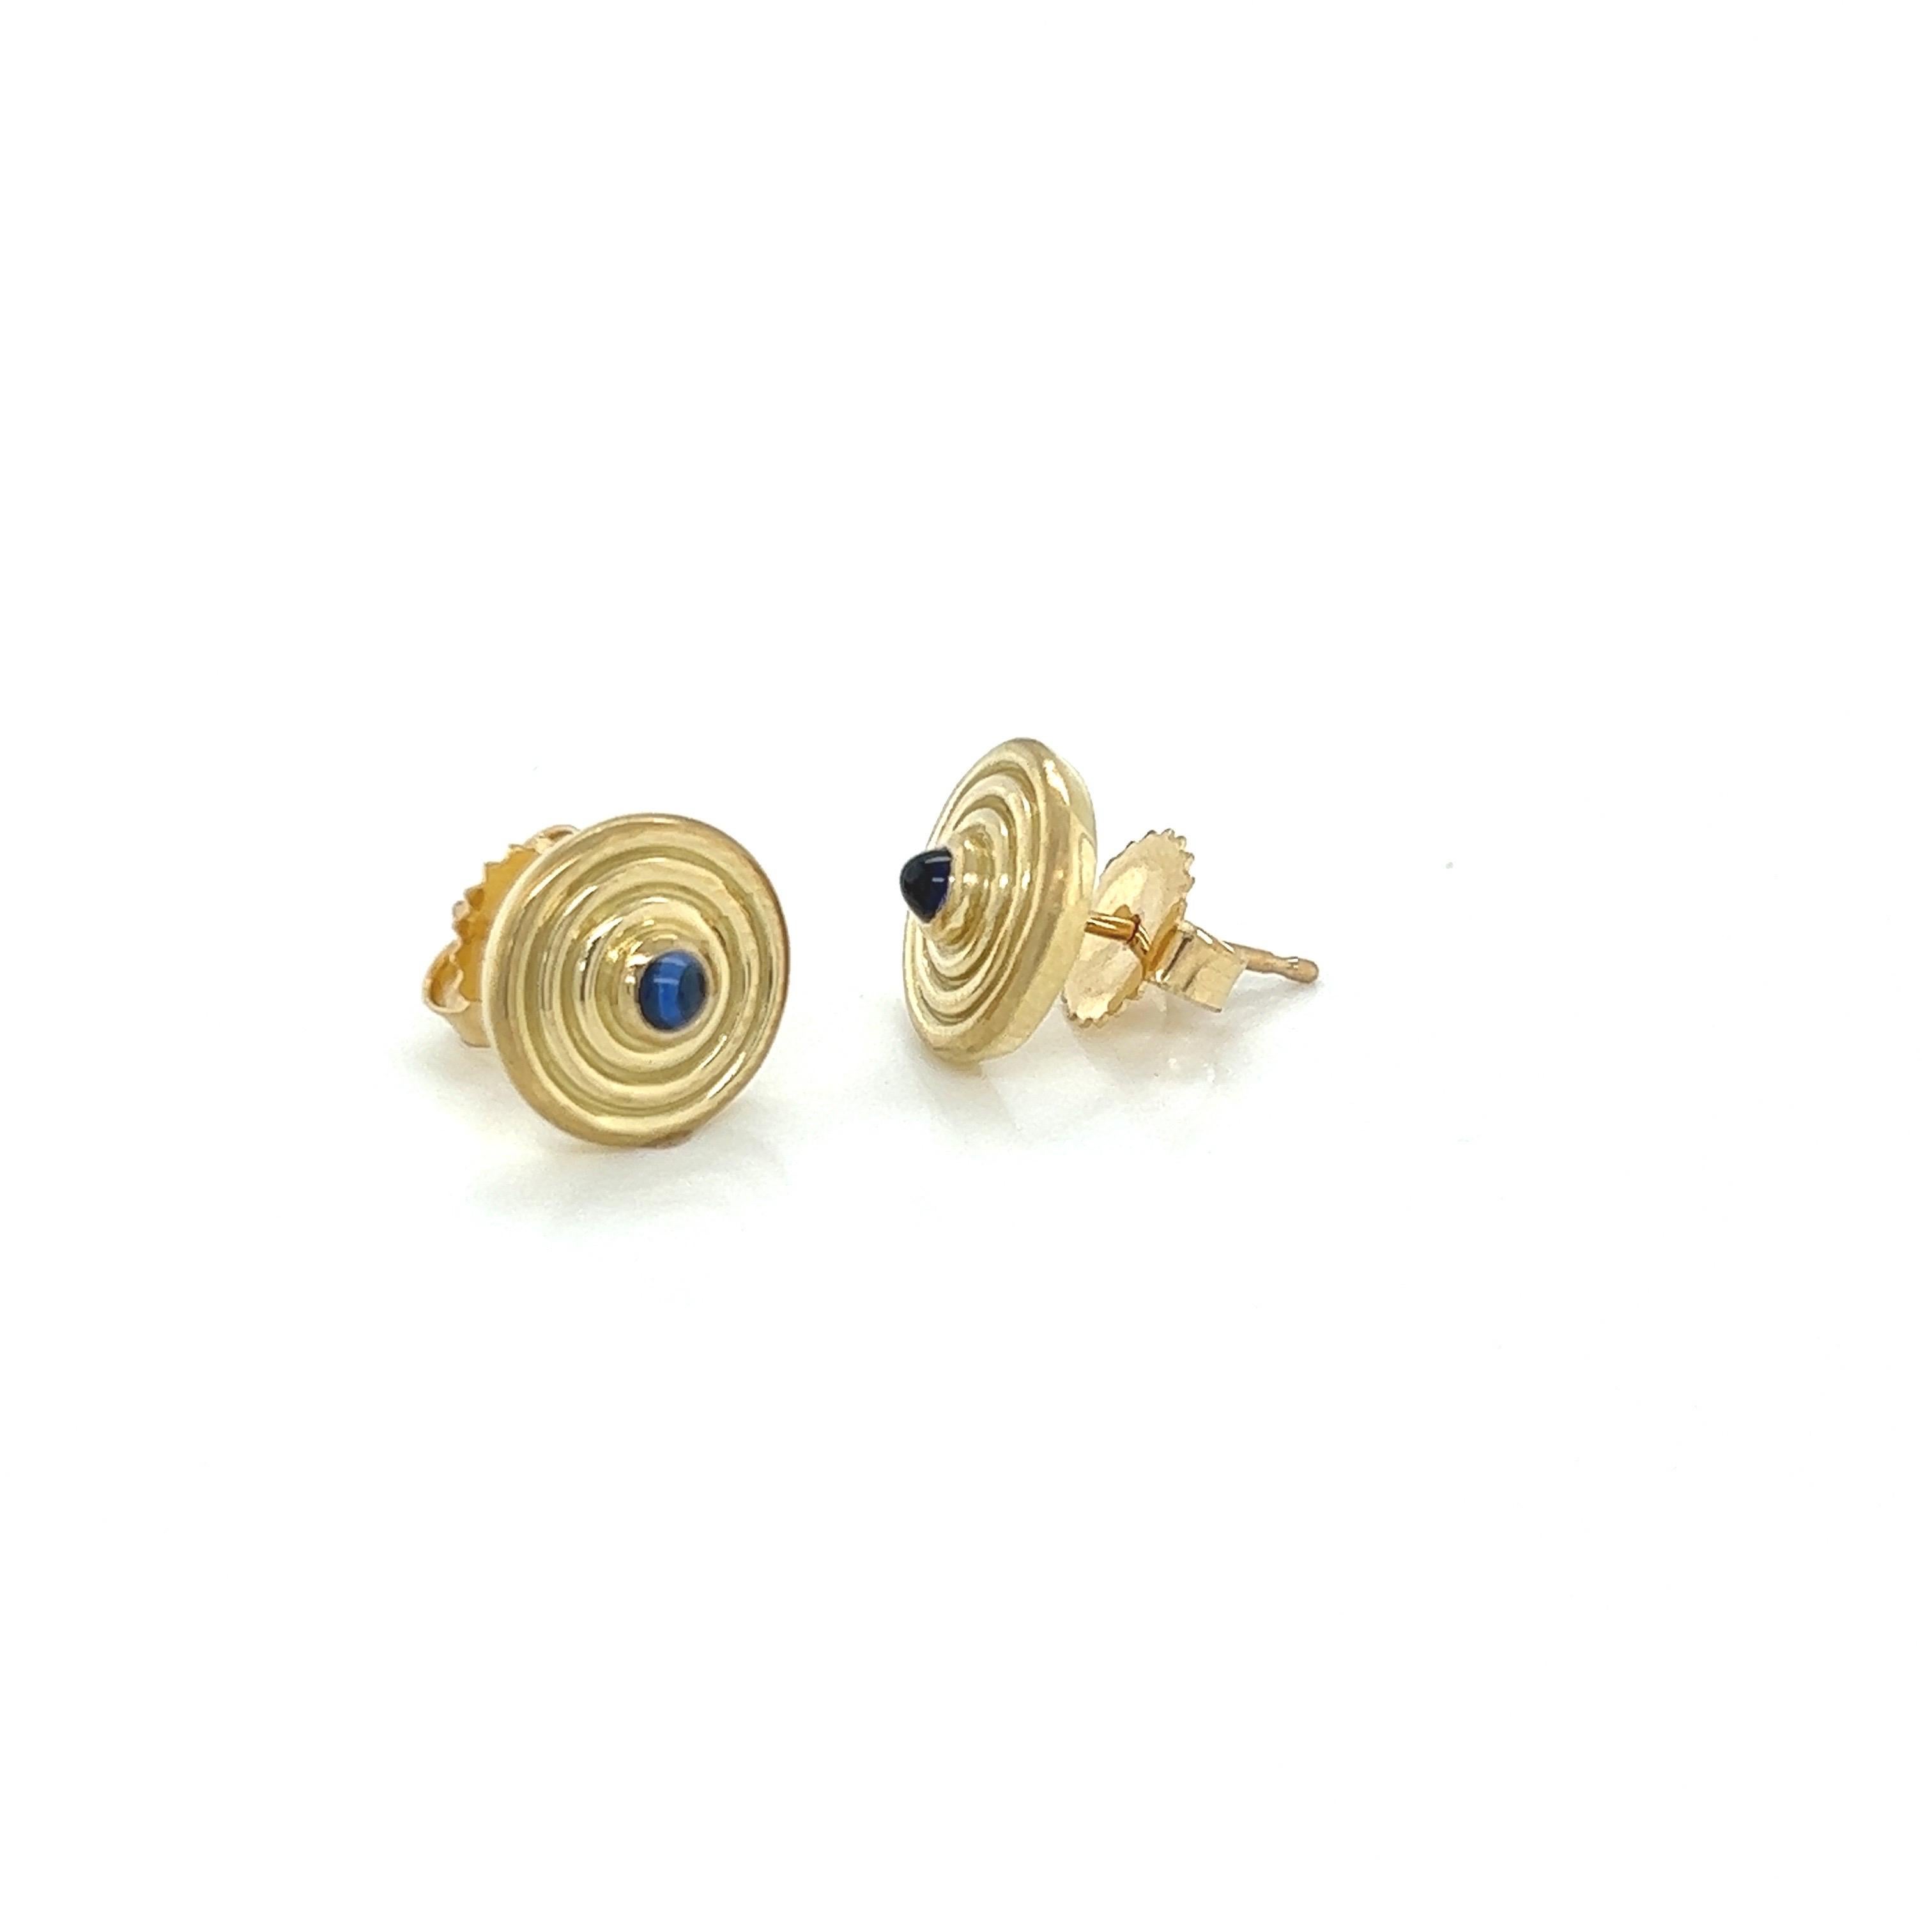 18k Yellow Gold Circular Multi Ring Stud Earrings With Cabochon Blue Sapphires
Comes with 18k gold earring backs.

Measures approx. 10.20mm 